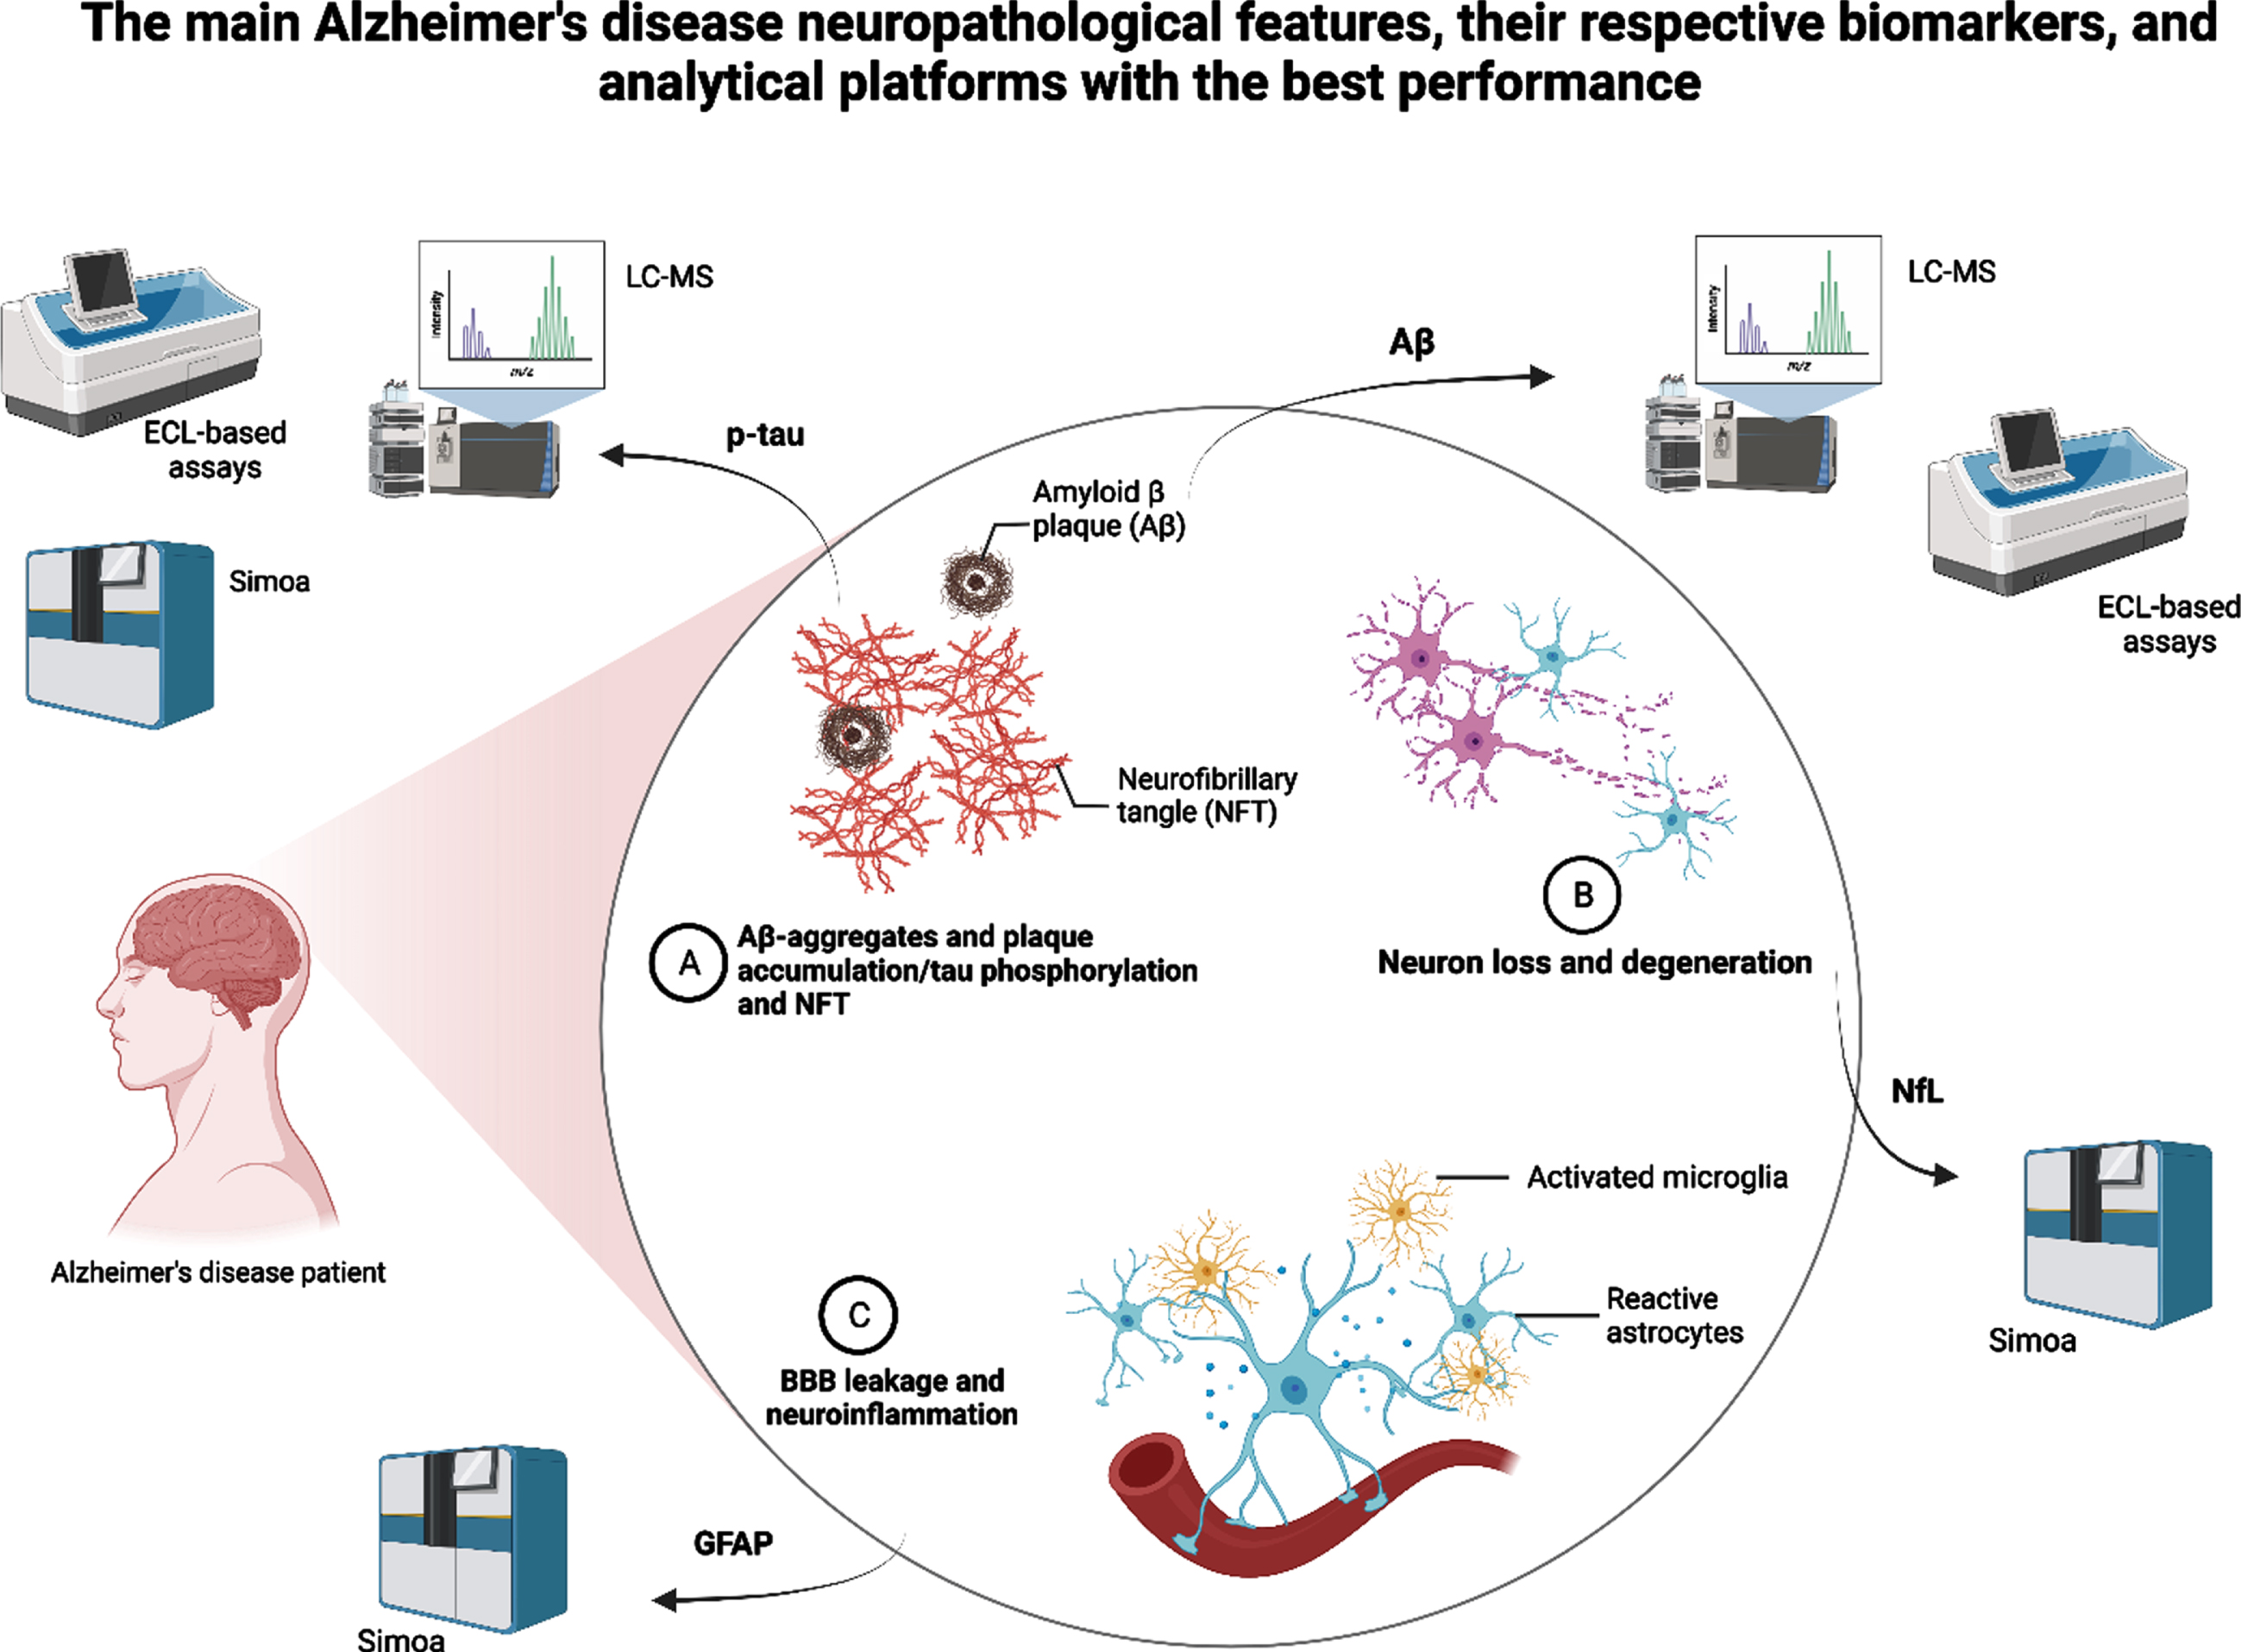 Summary of the main Alzheimer’s disease neuropathological features, their respective and most promising biomarkers, and the analytical platforms that showed the best performance in recent studies. LC-MS, liquid chromatography-mass spectrometry; ECL, electrochemiluminescence; Simoa, single-molecule array; p-tau, plasma phosphorylated tau; Aβ, amyloid-beta; GFAP, glial fibrillary acidic protein.